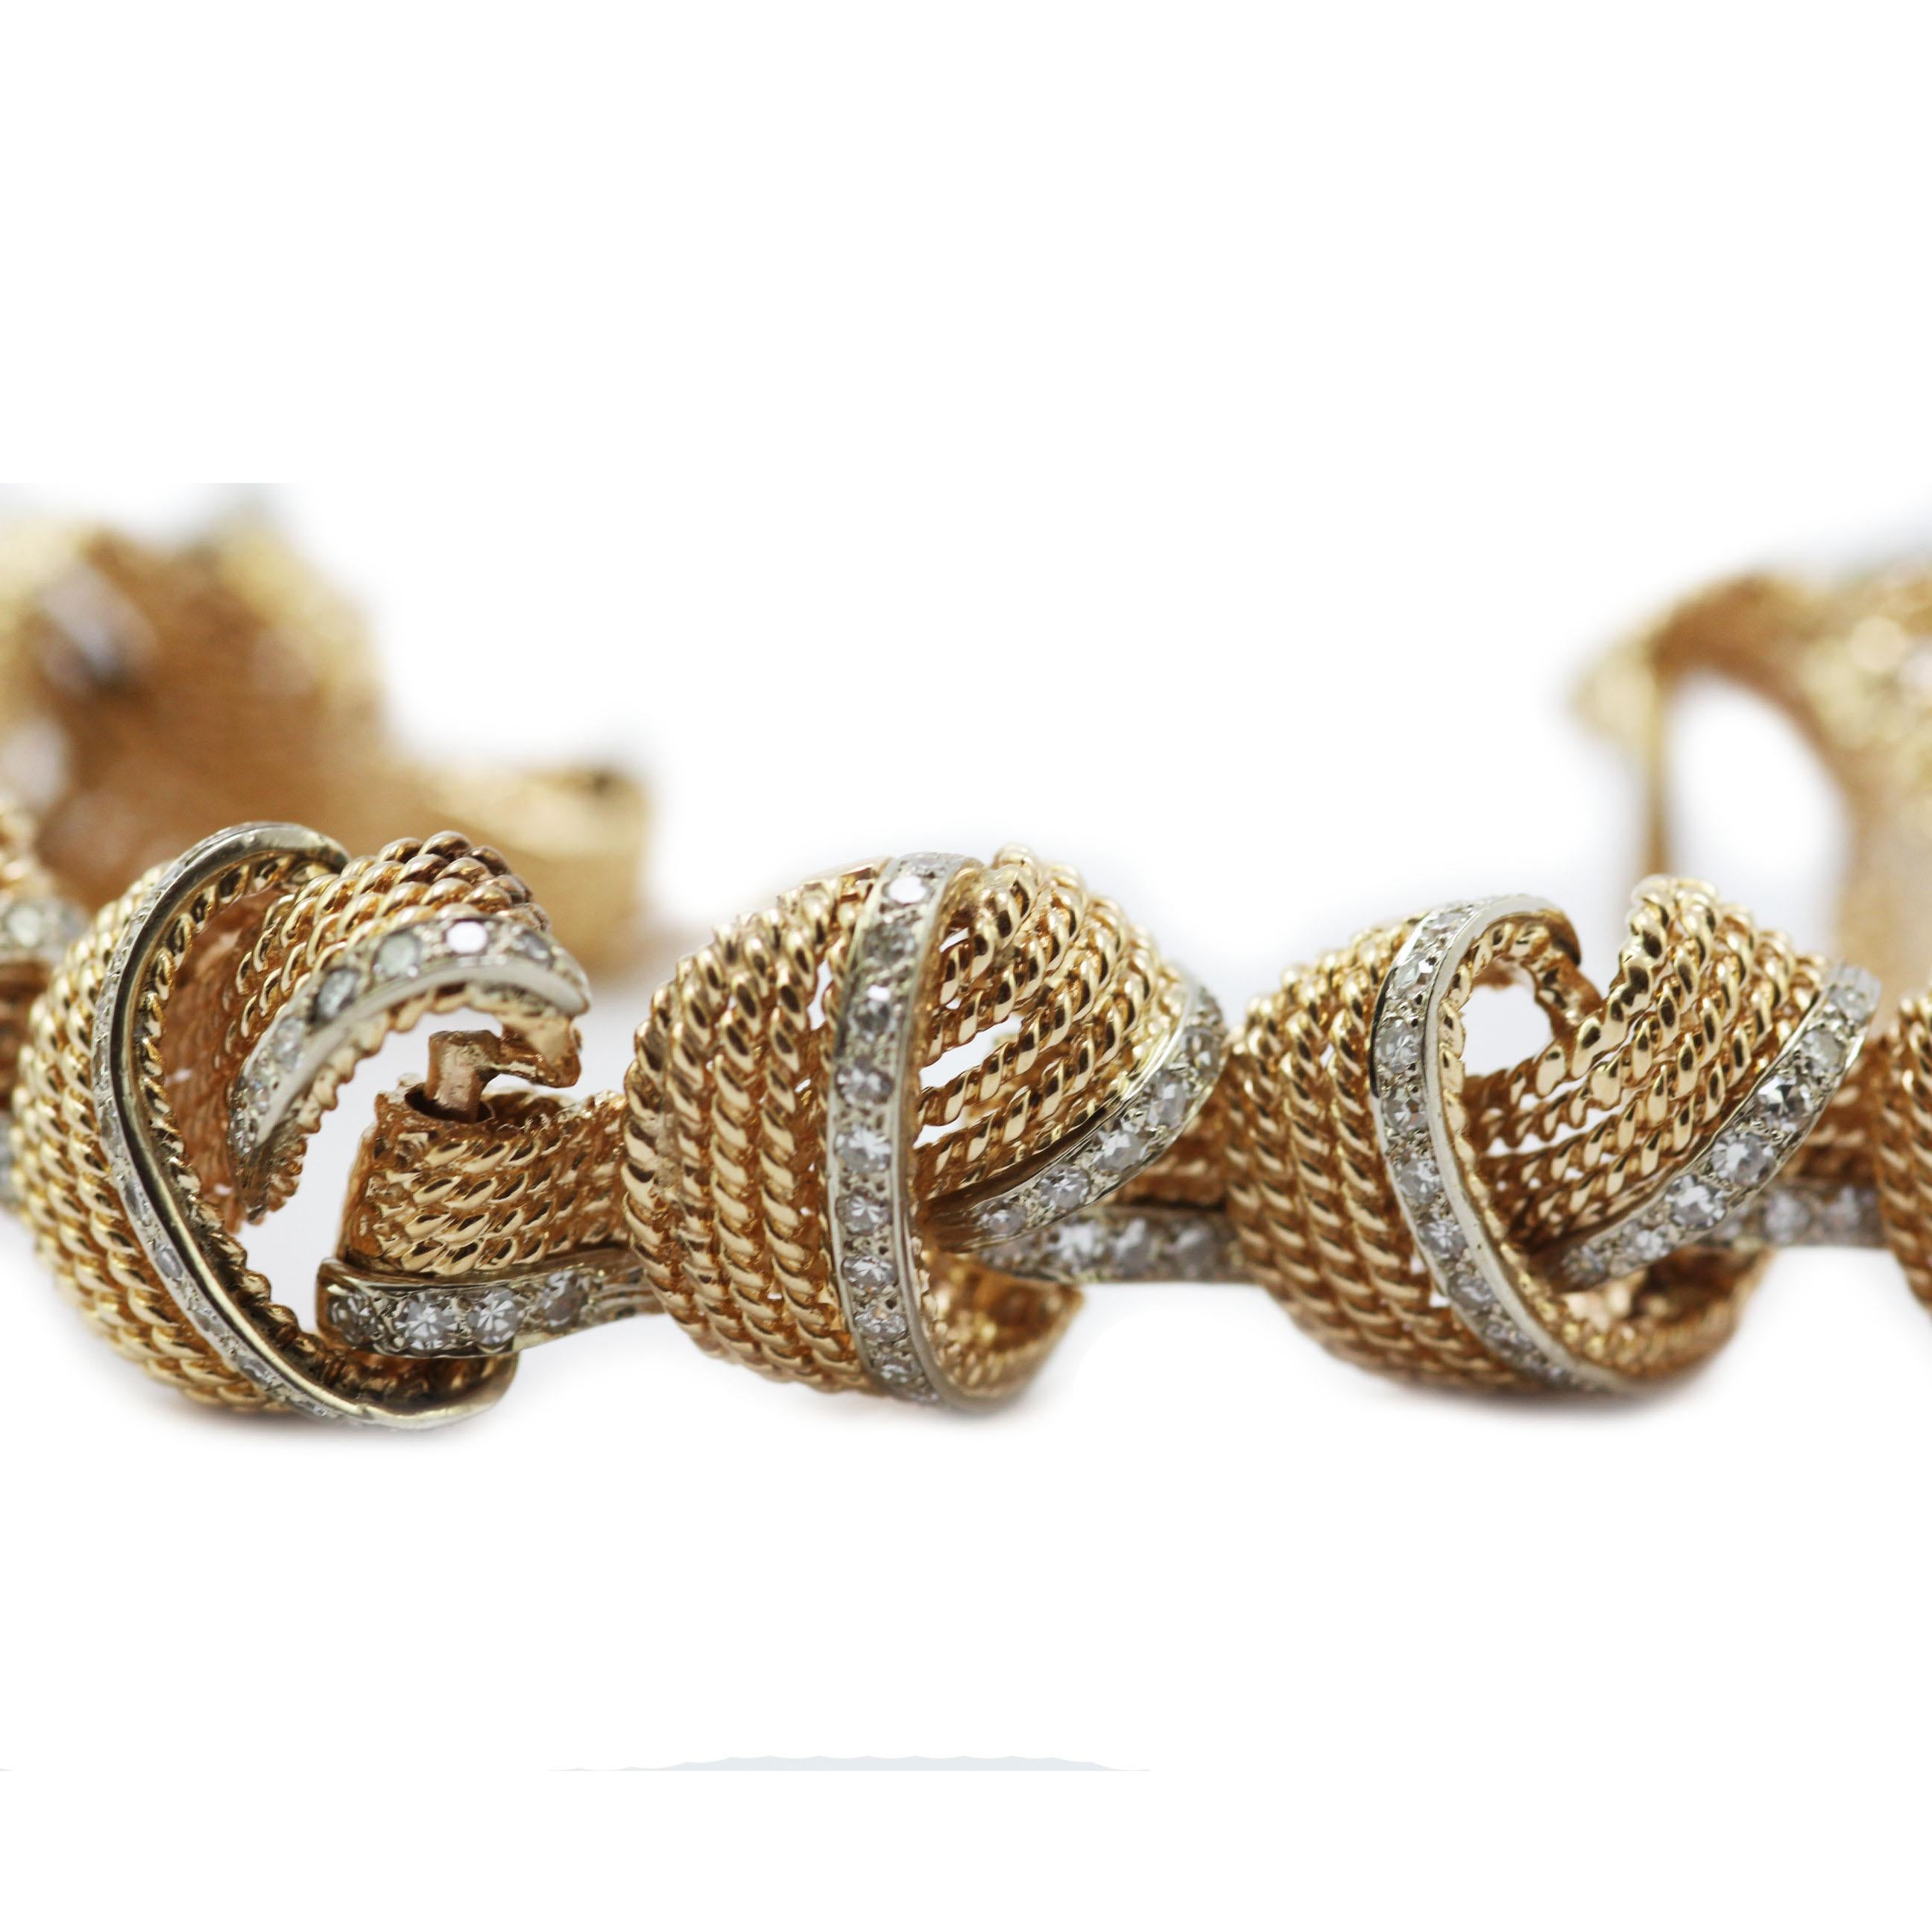 A graceful gold knot bracelet interwoven with rows of sparkling diamonds. The bracelet is formed of strands of 18 carat yellow gold woven into loose knots, intertwined with diamonds. The bracelet has a double locking safety clasp. 
207 x  round